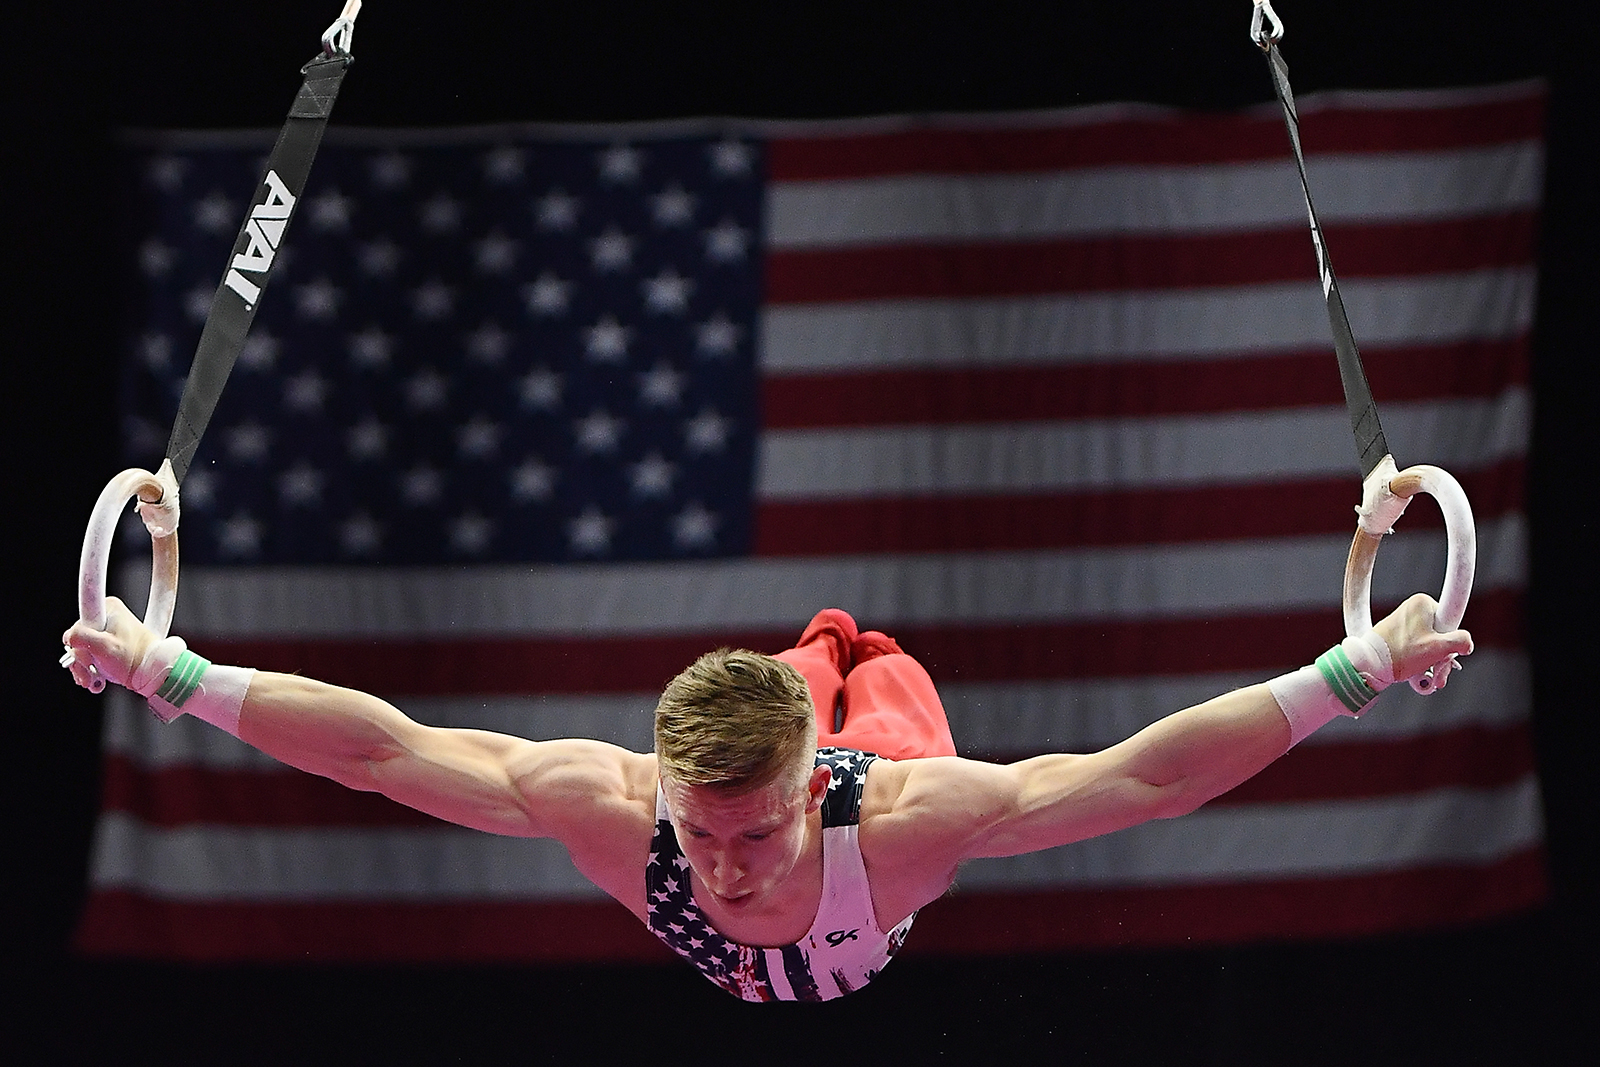 Shane Wiskus of the United States competes on the rings during the 2020 American Cup at Fiserv Forum on March 7, in Milwaukee, Wisconsin. 